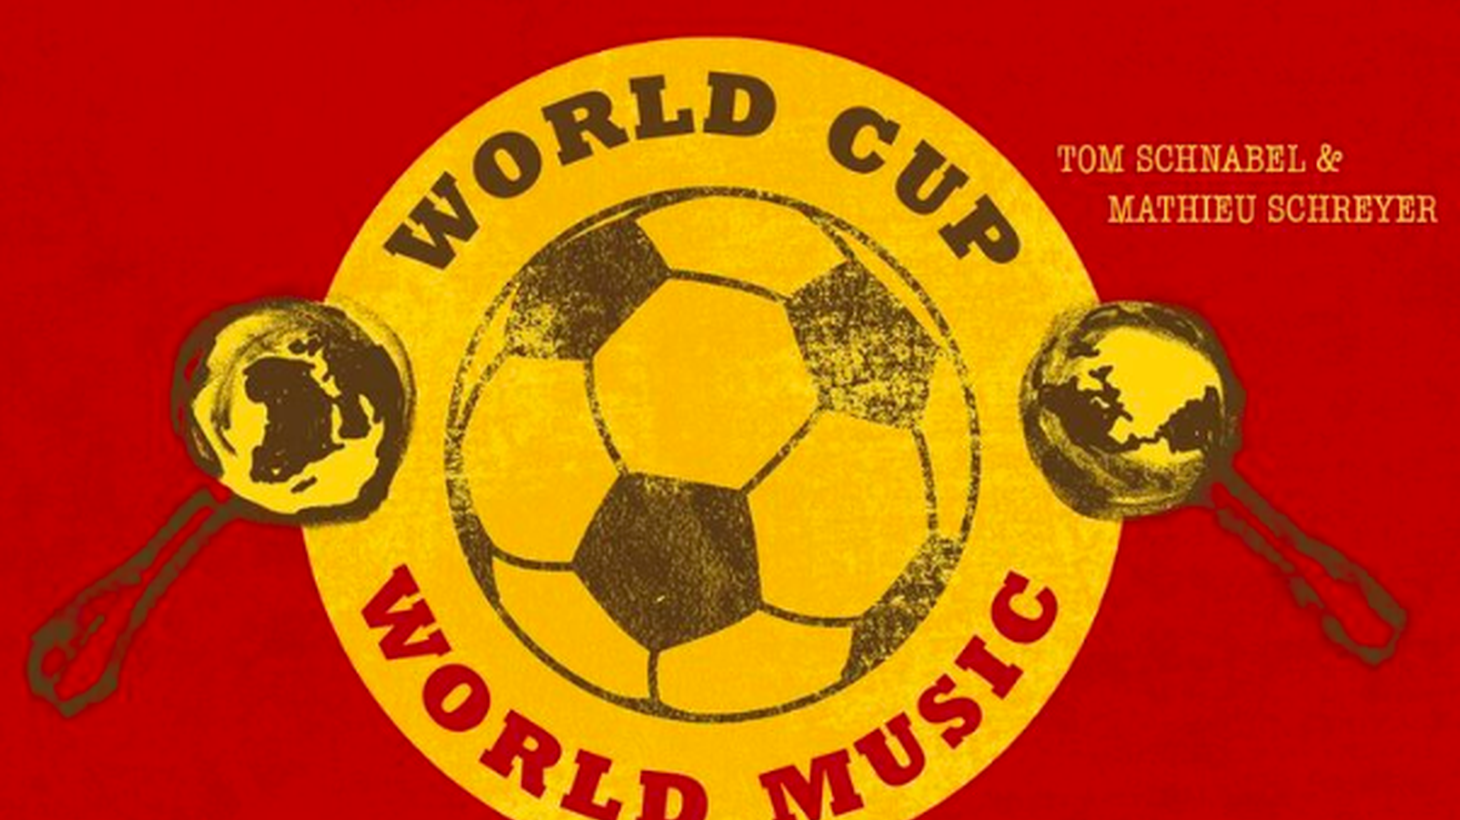 Rhythm Planet host Tom Schnabel and DJ Mathieu Schreyer drop by MBE for a World Cup musical preview at 10am.